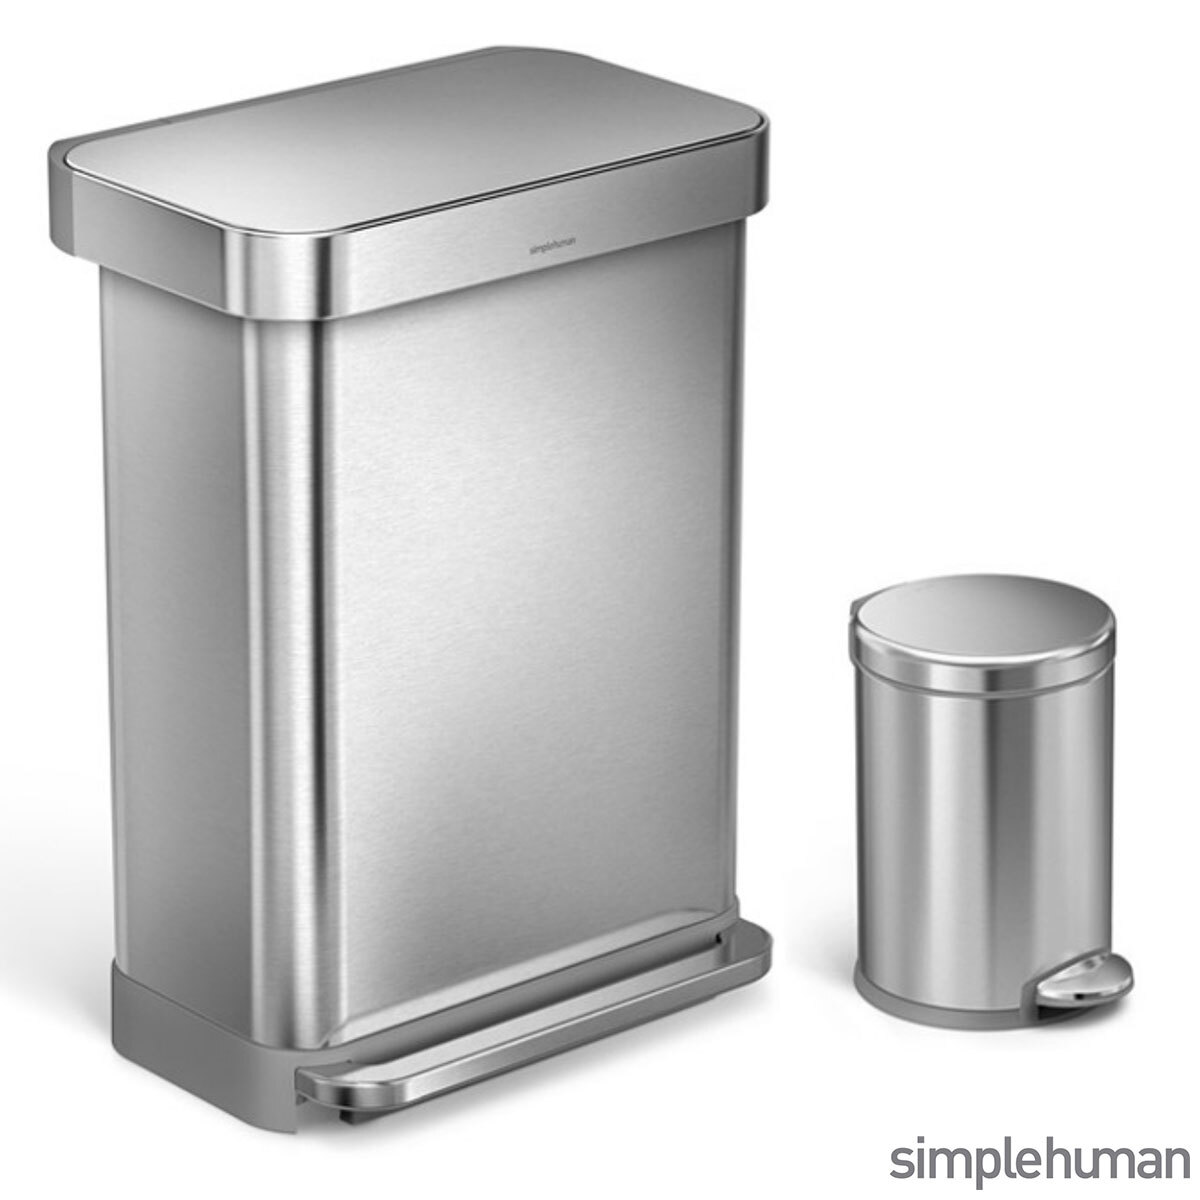 Cut out image of both bins on white background